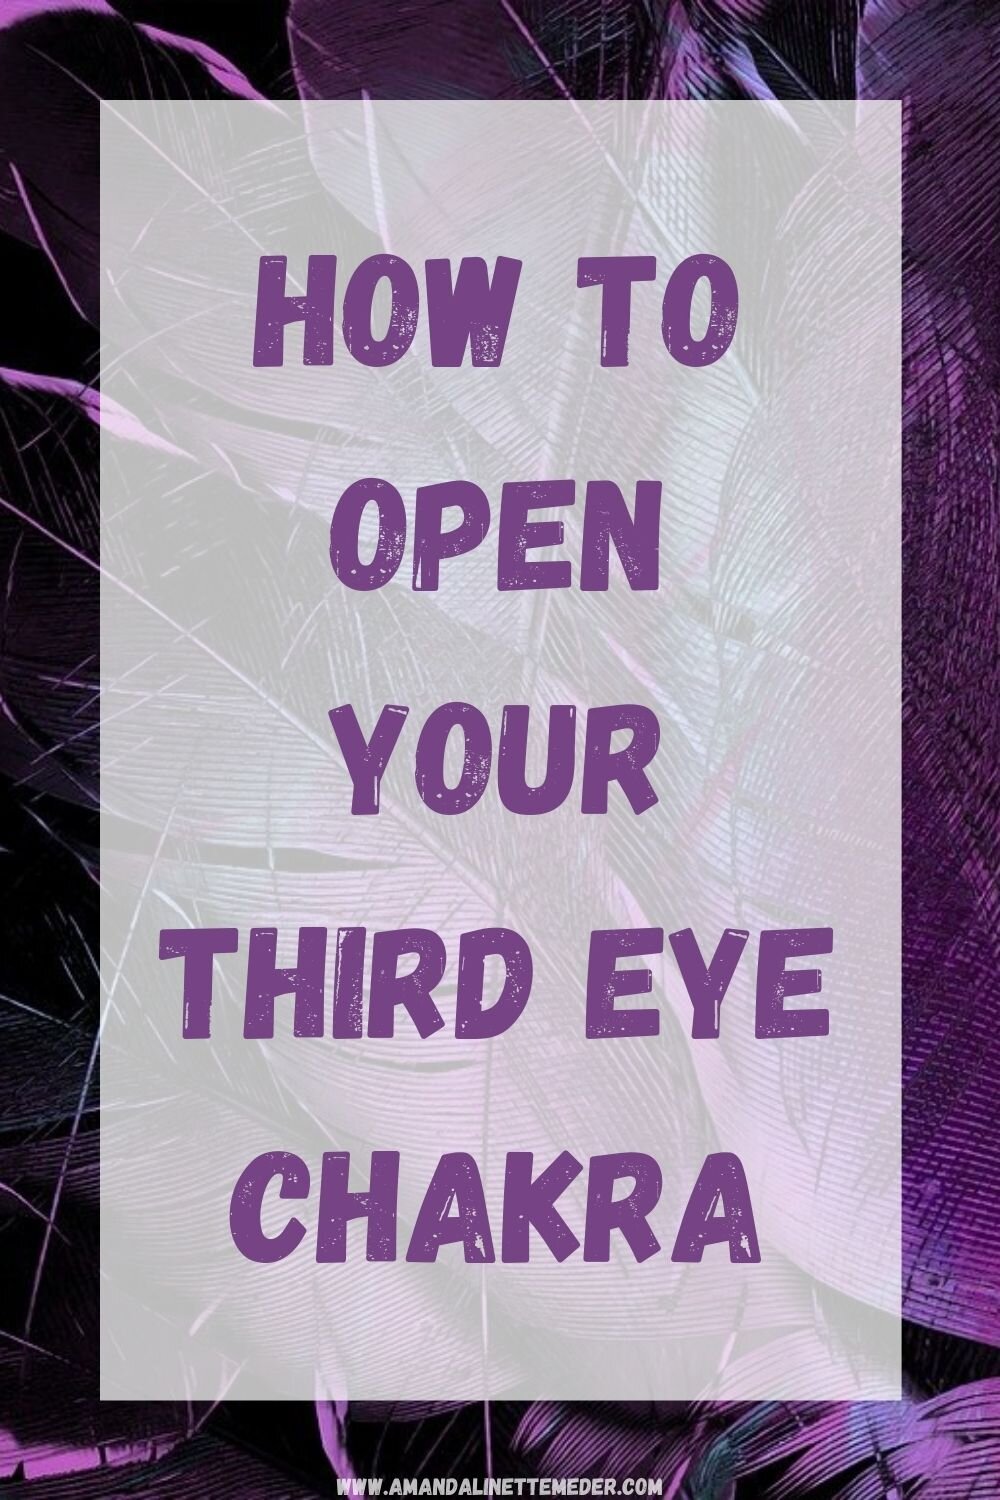 Third Eye Chakra exercises. Photo of deep violet and iridescent green-blue feathers by Yuri_B from Pixabay with text overlay How To Open Your Third Eye Chakra.